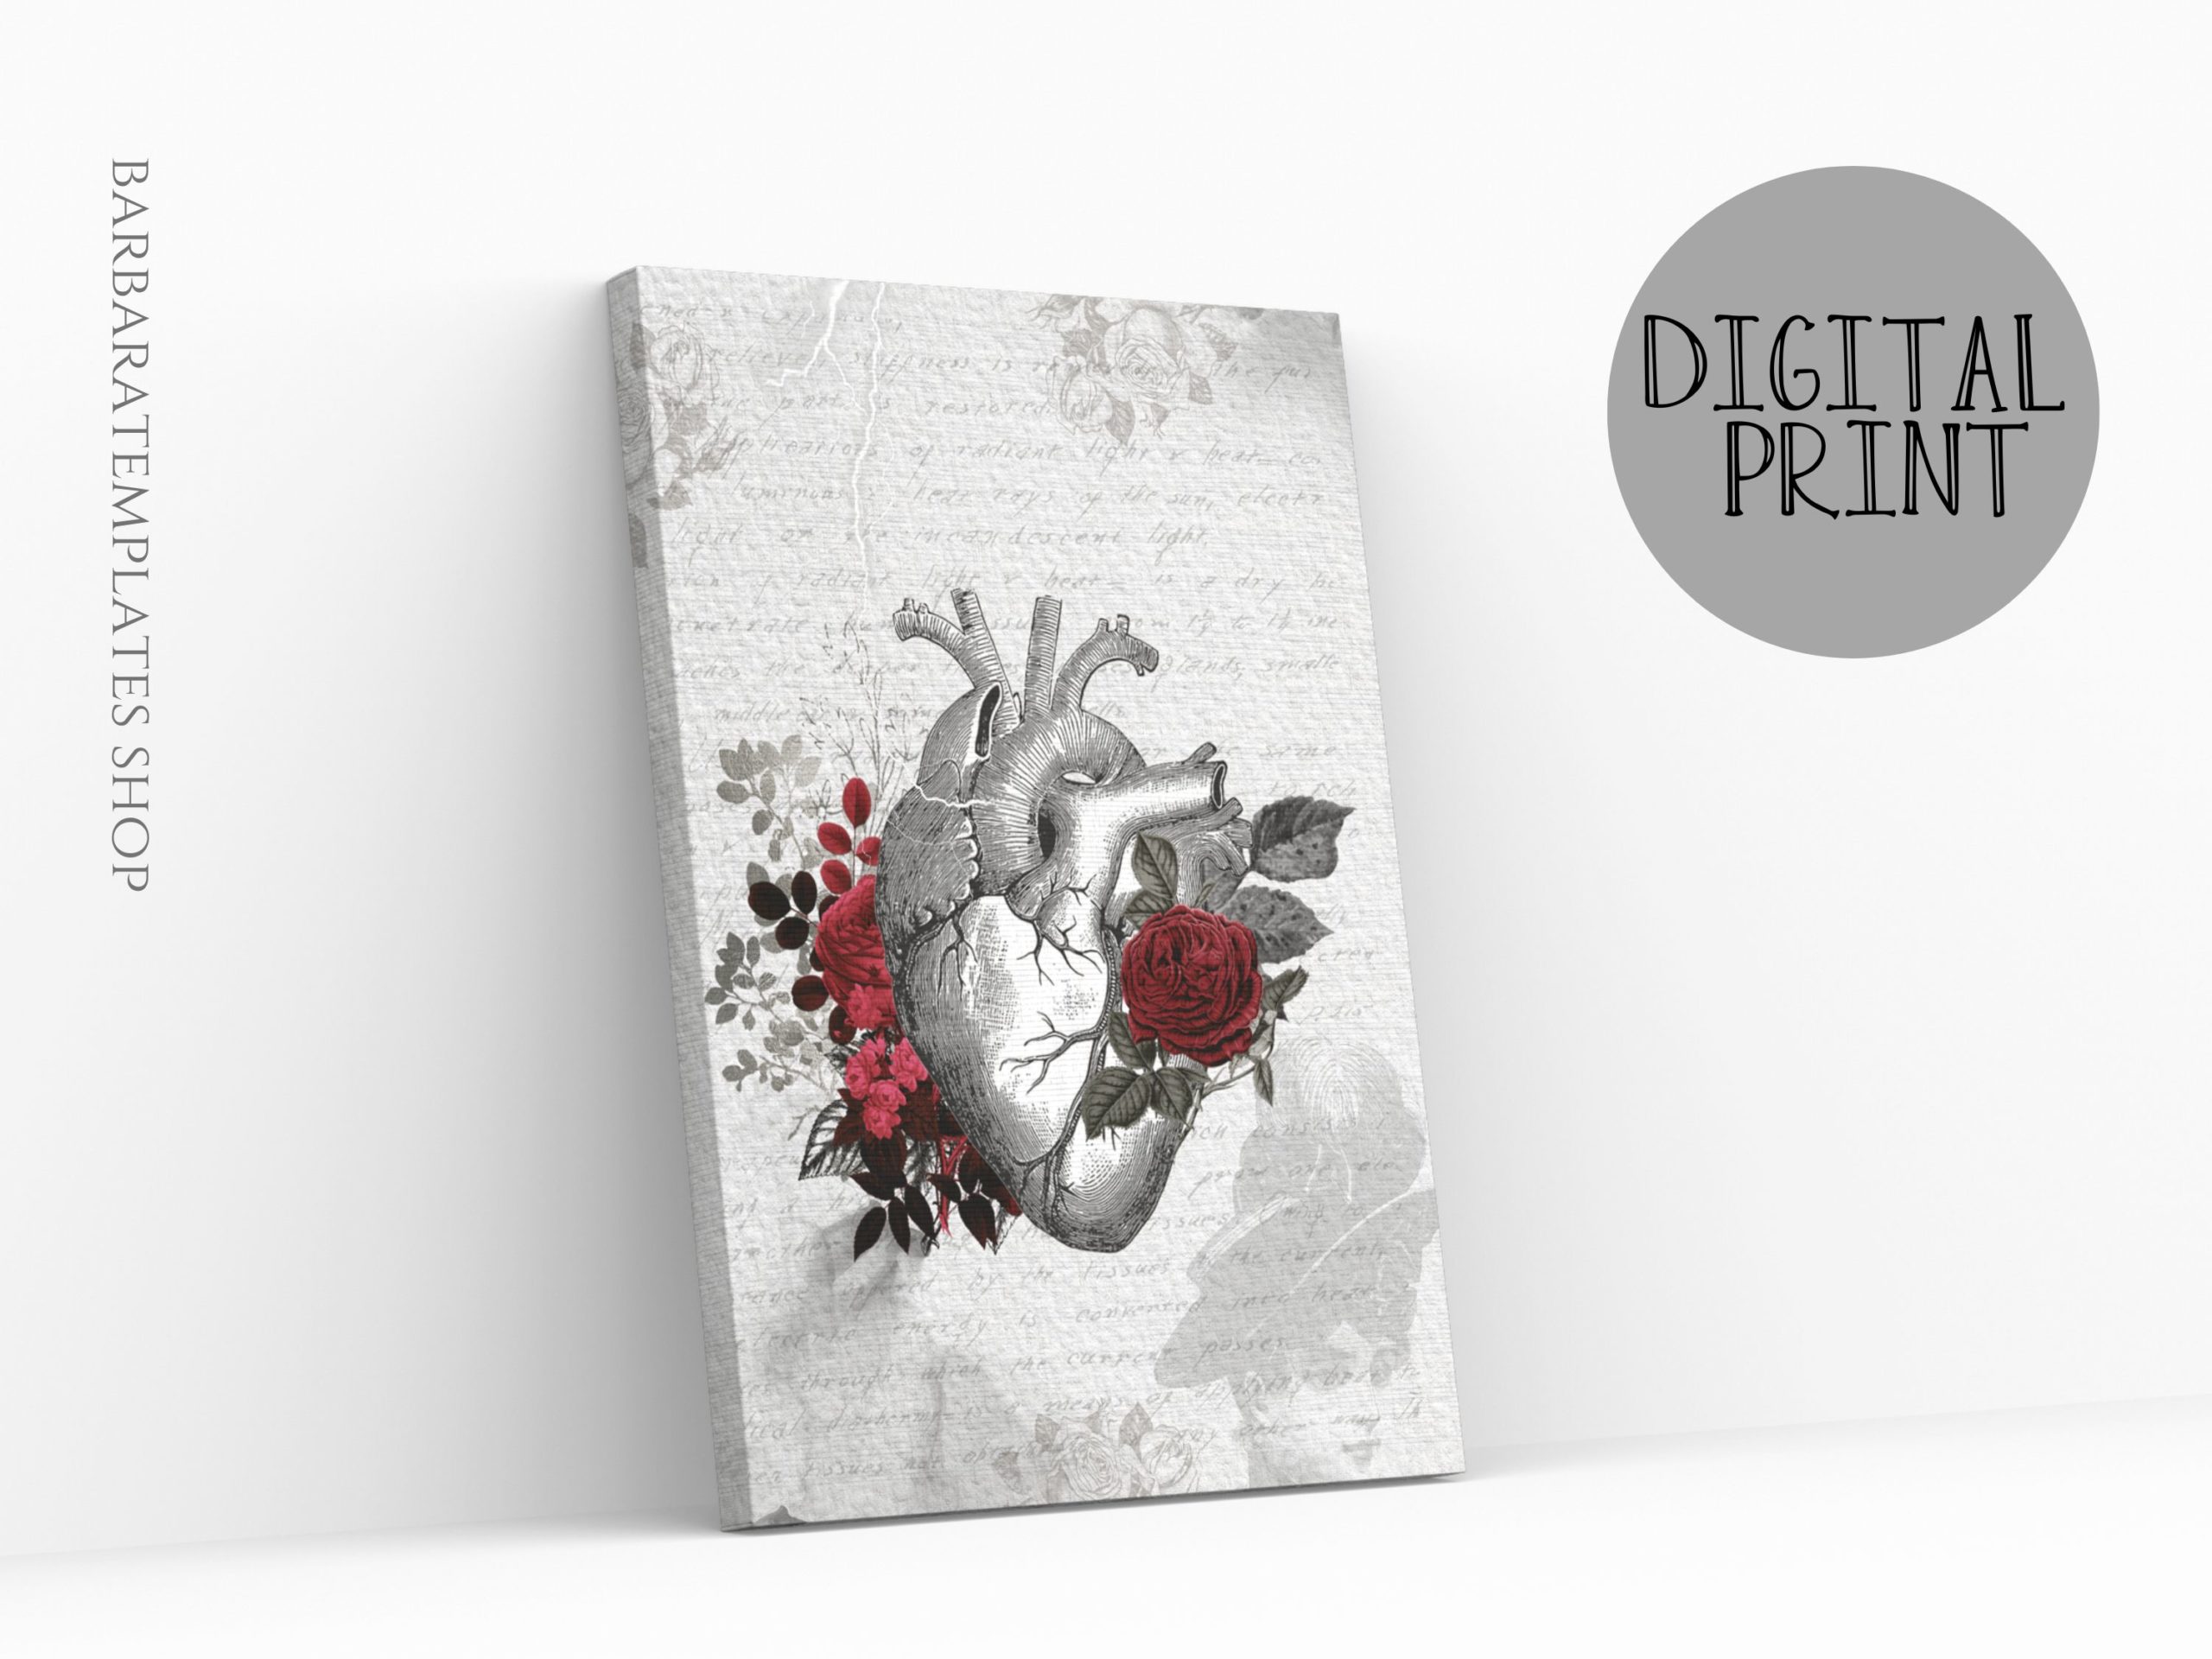 Human heart with roses aesthetic digital wall decor